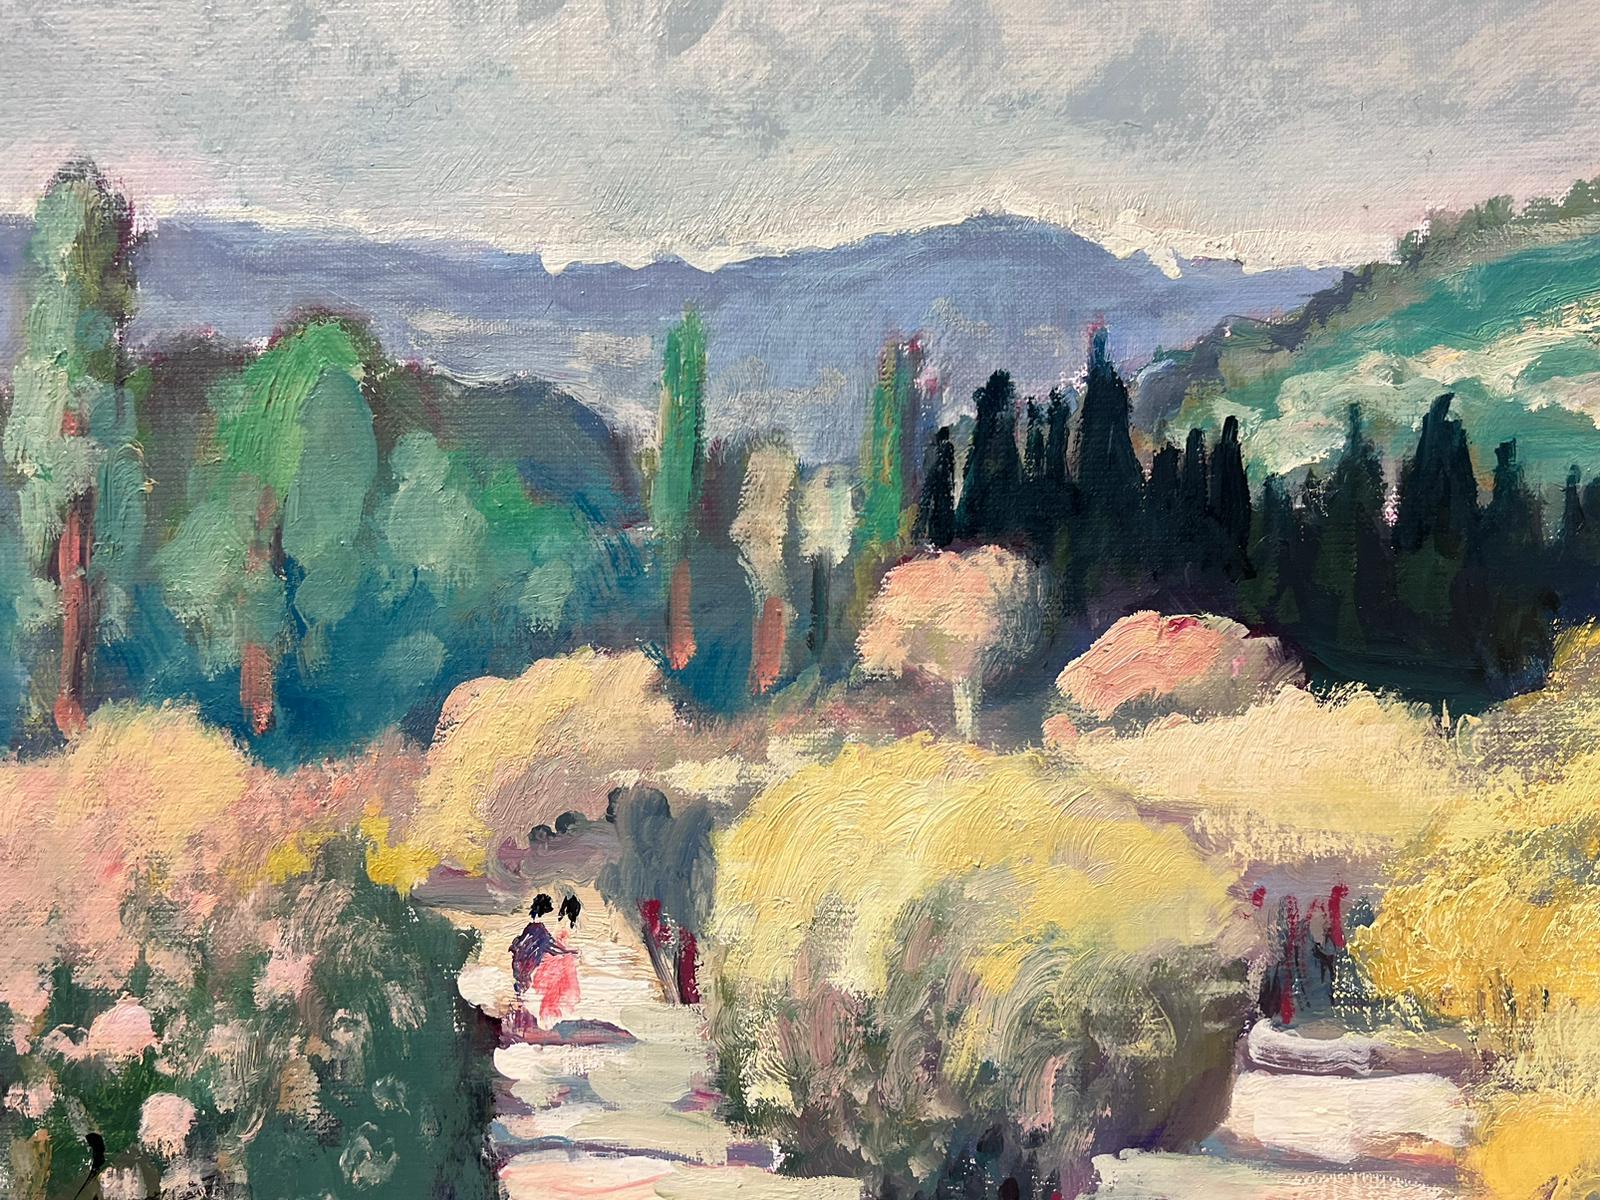 Artist/ School: Guy Benard (French b.1928) signed lower corner. Painter from Rouen, Normandy, exhibited throughout France. 

Title: Les Baux de Provence

Medium: signed oil on canvas, unframed and inscribed verso

size: 19.75 x 24